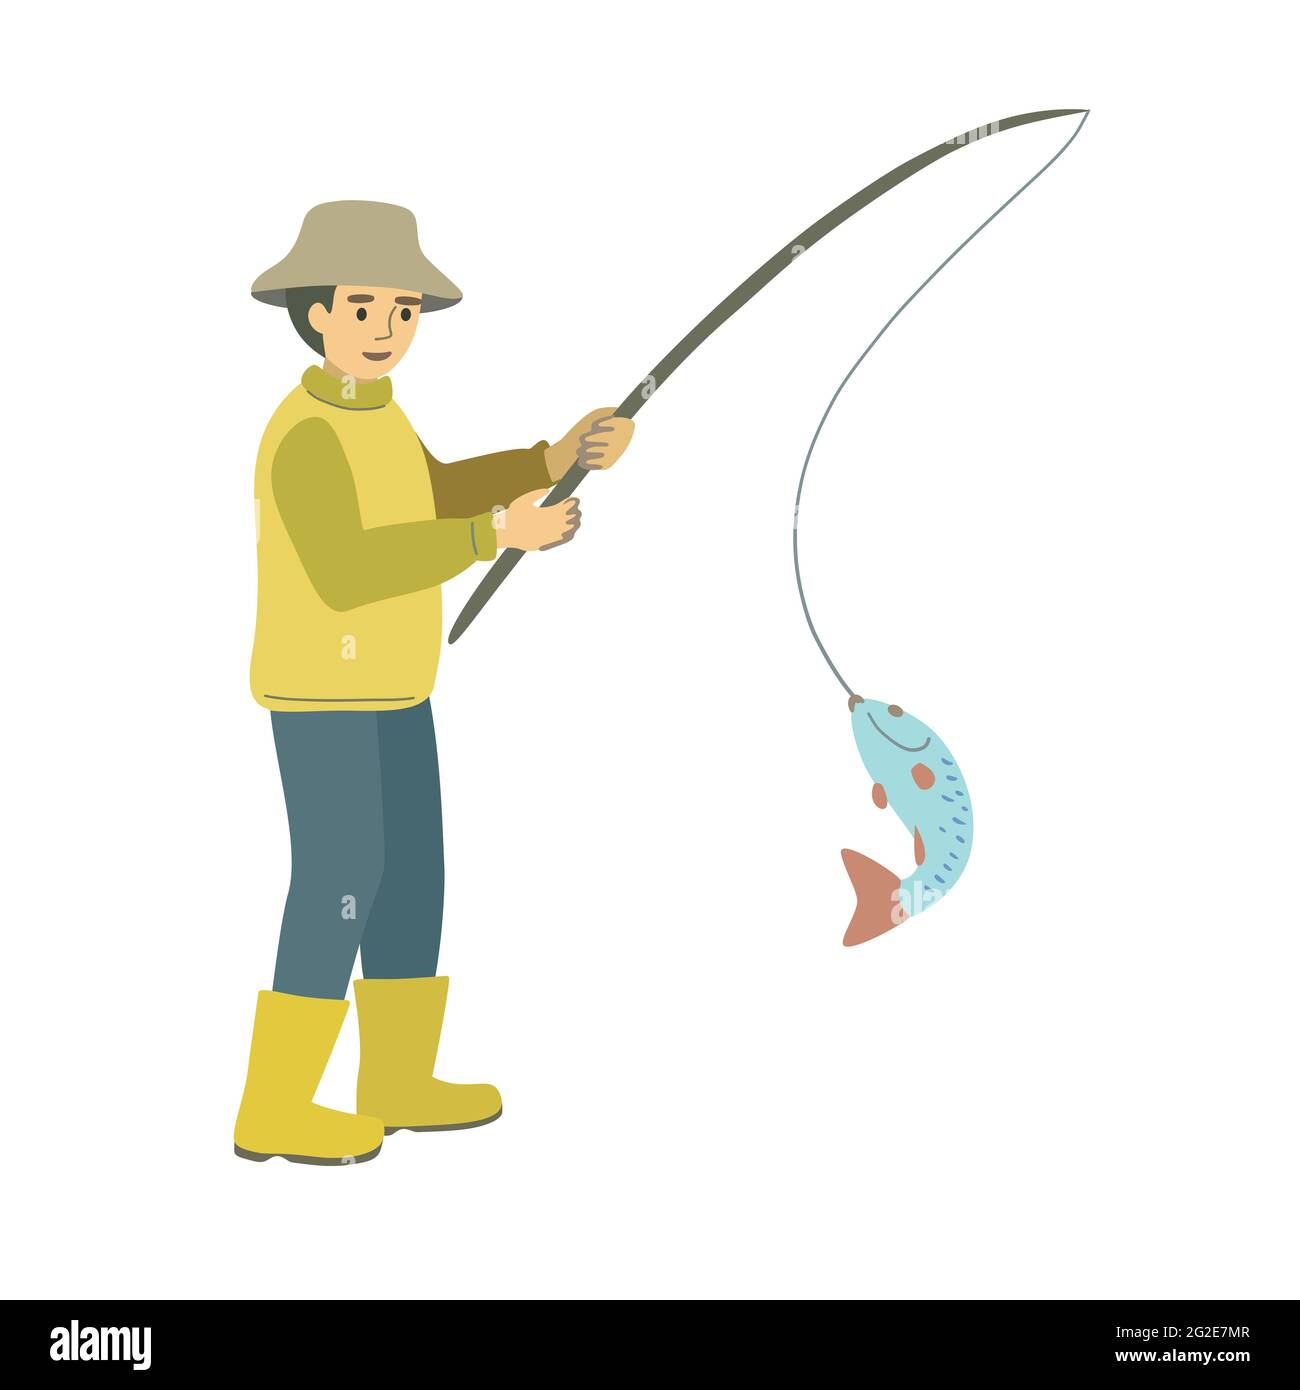 Catching fish with hands Cut Out Stock Images & Pictures - Alamy